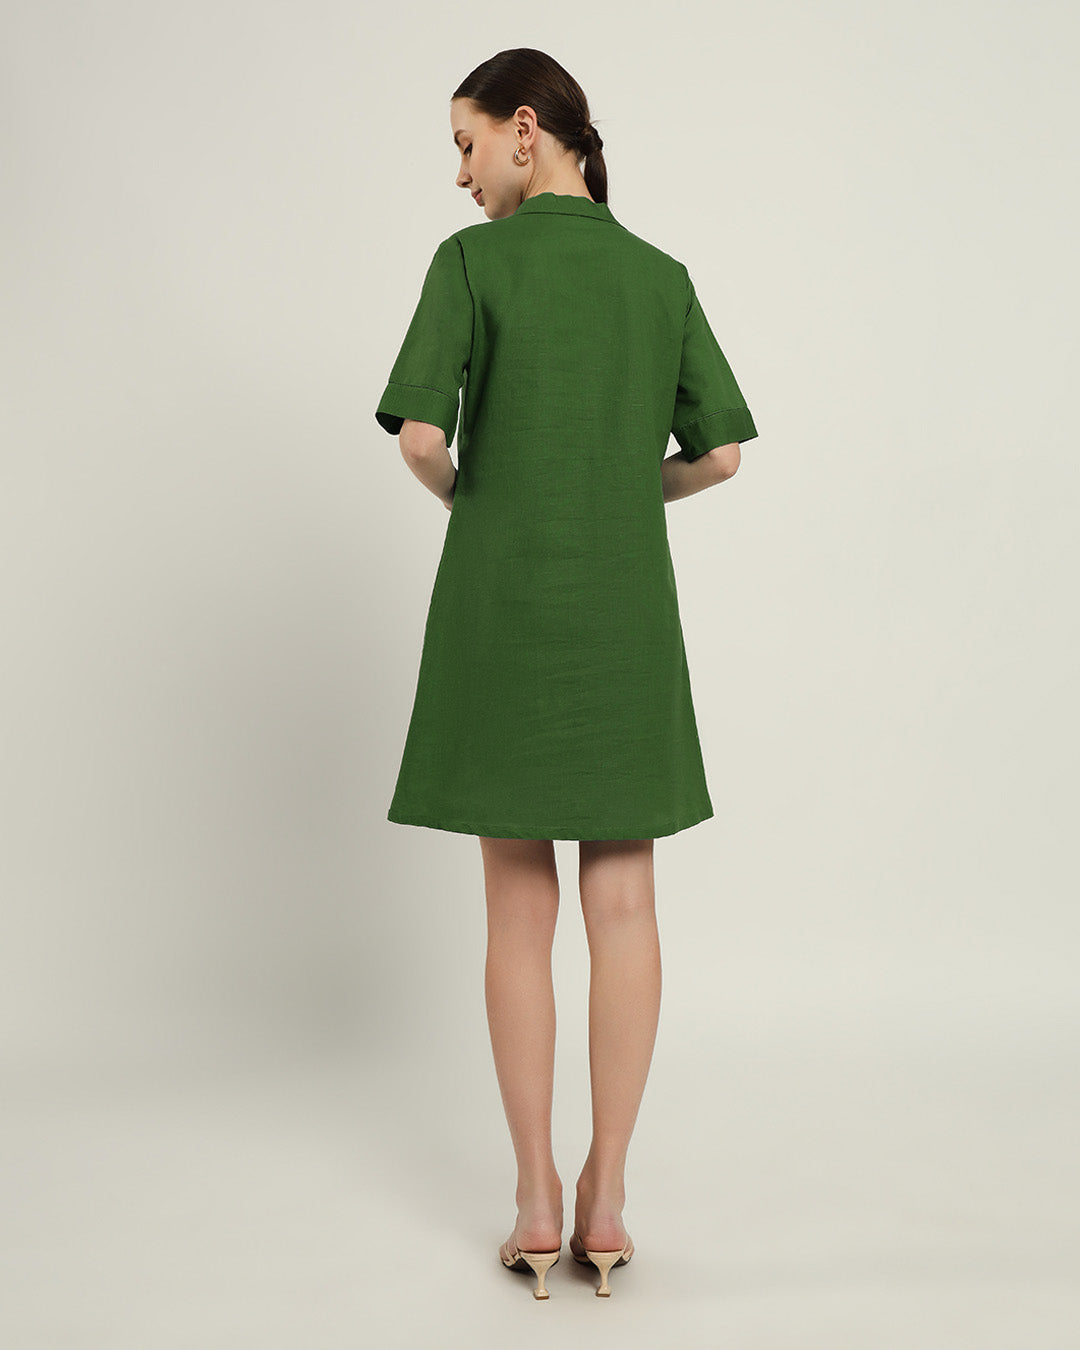 The Ermont Emerald Dress